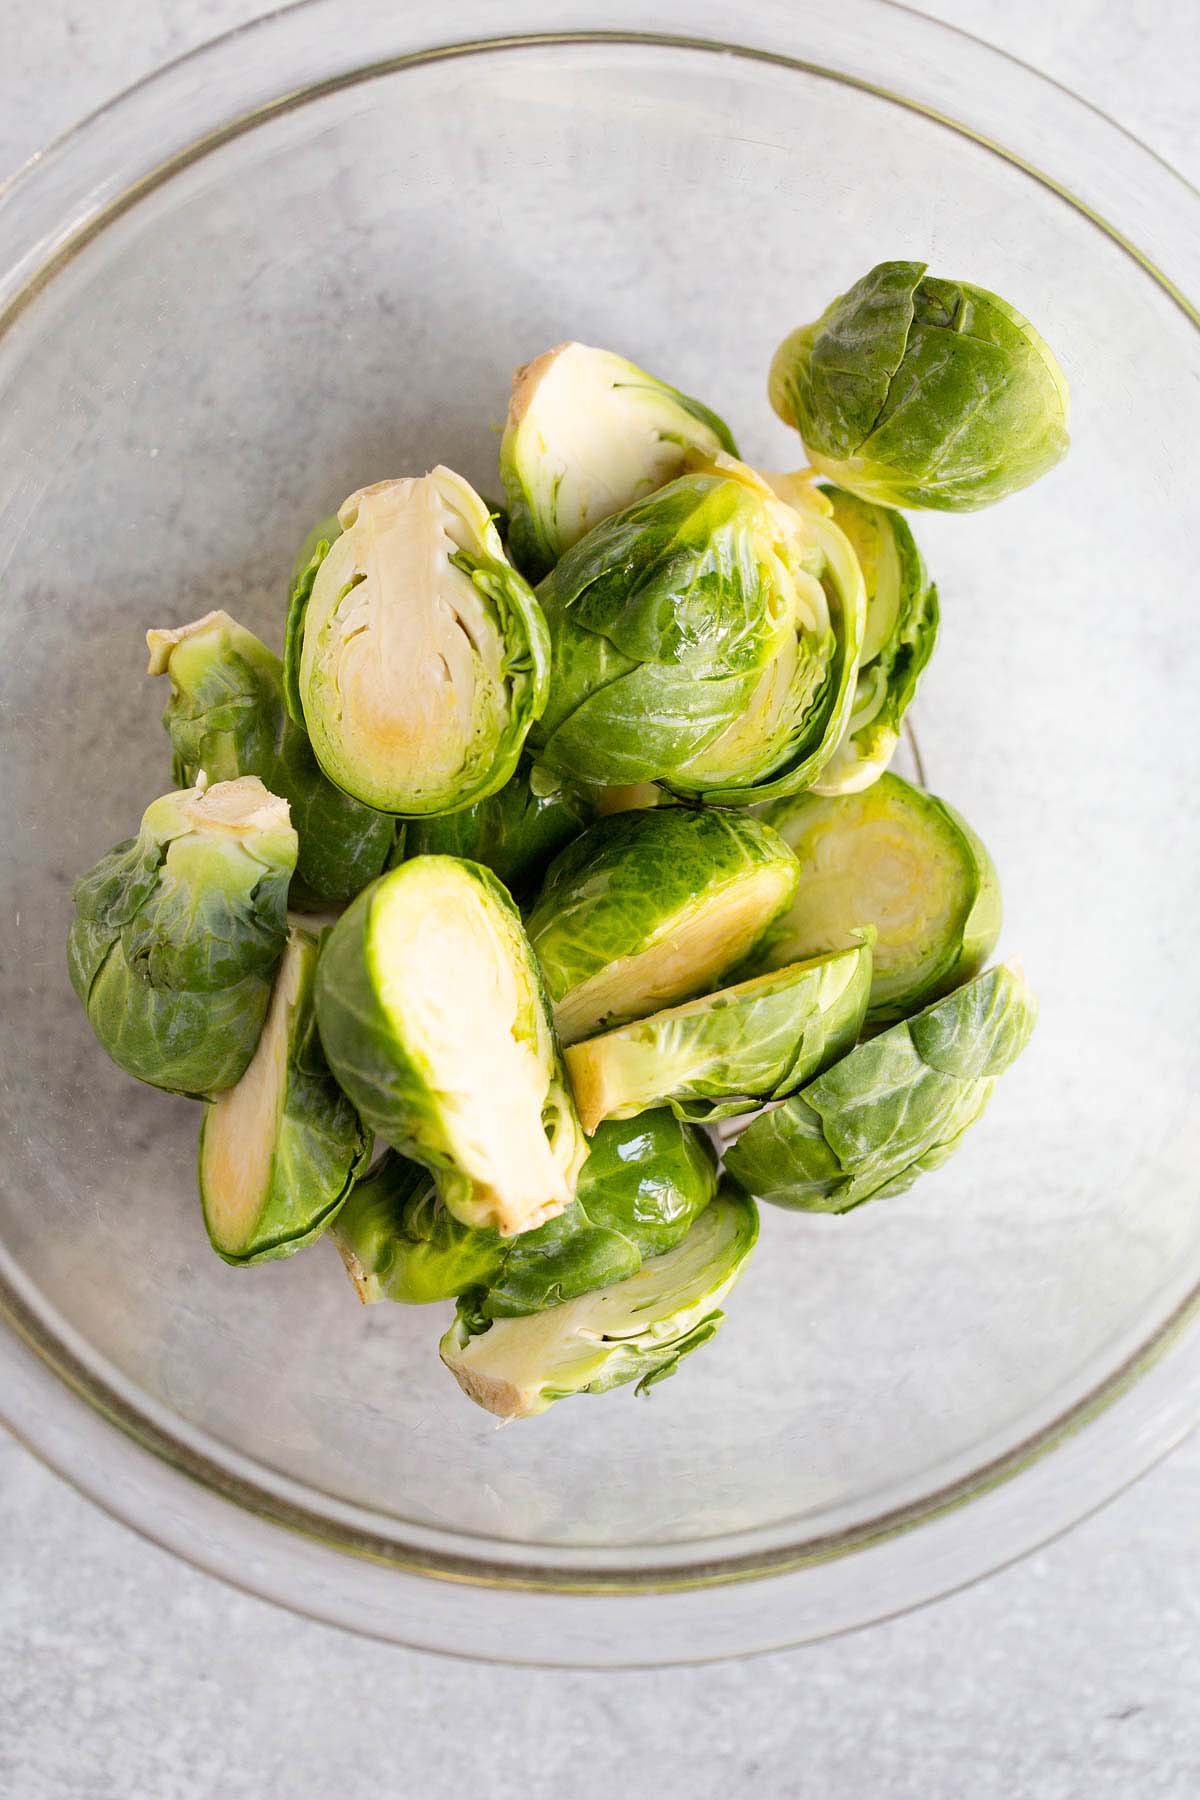 Brussels sprouts in a bowl.